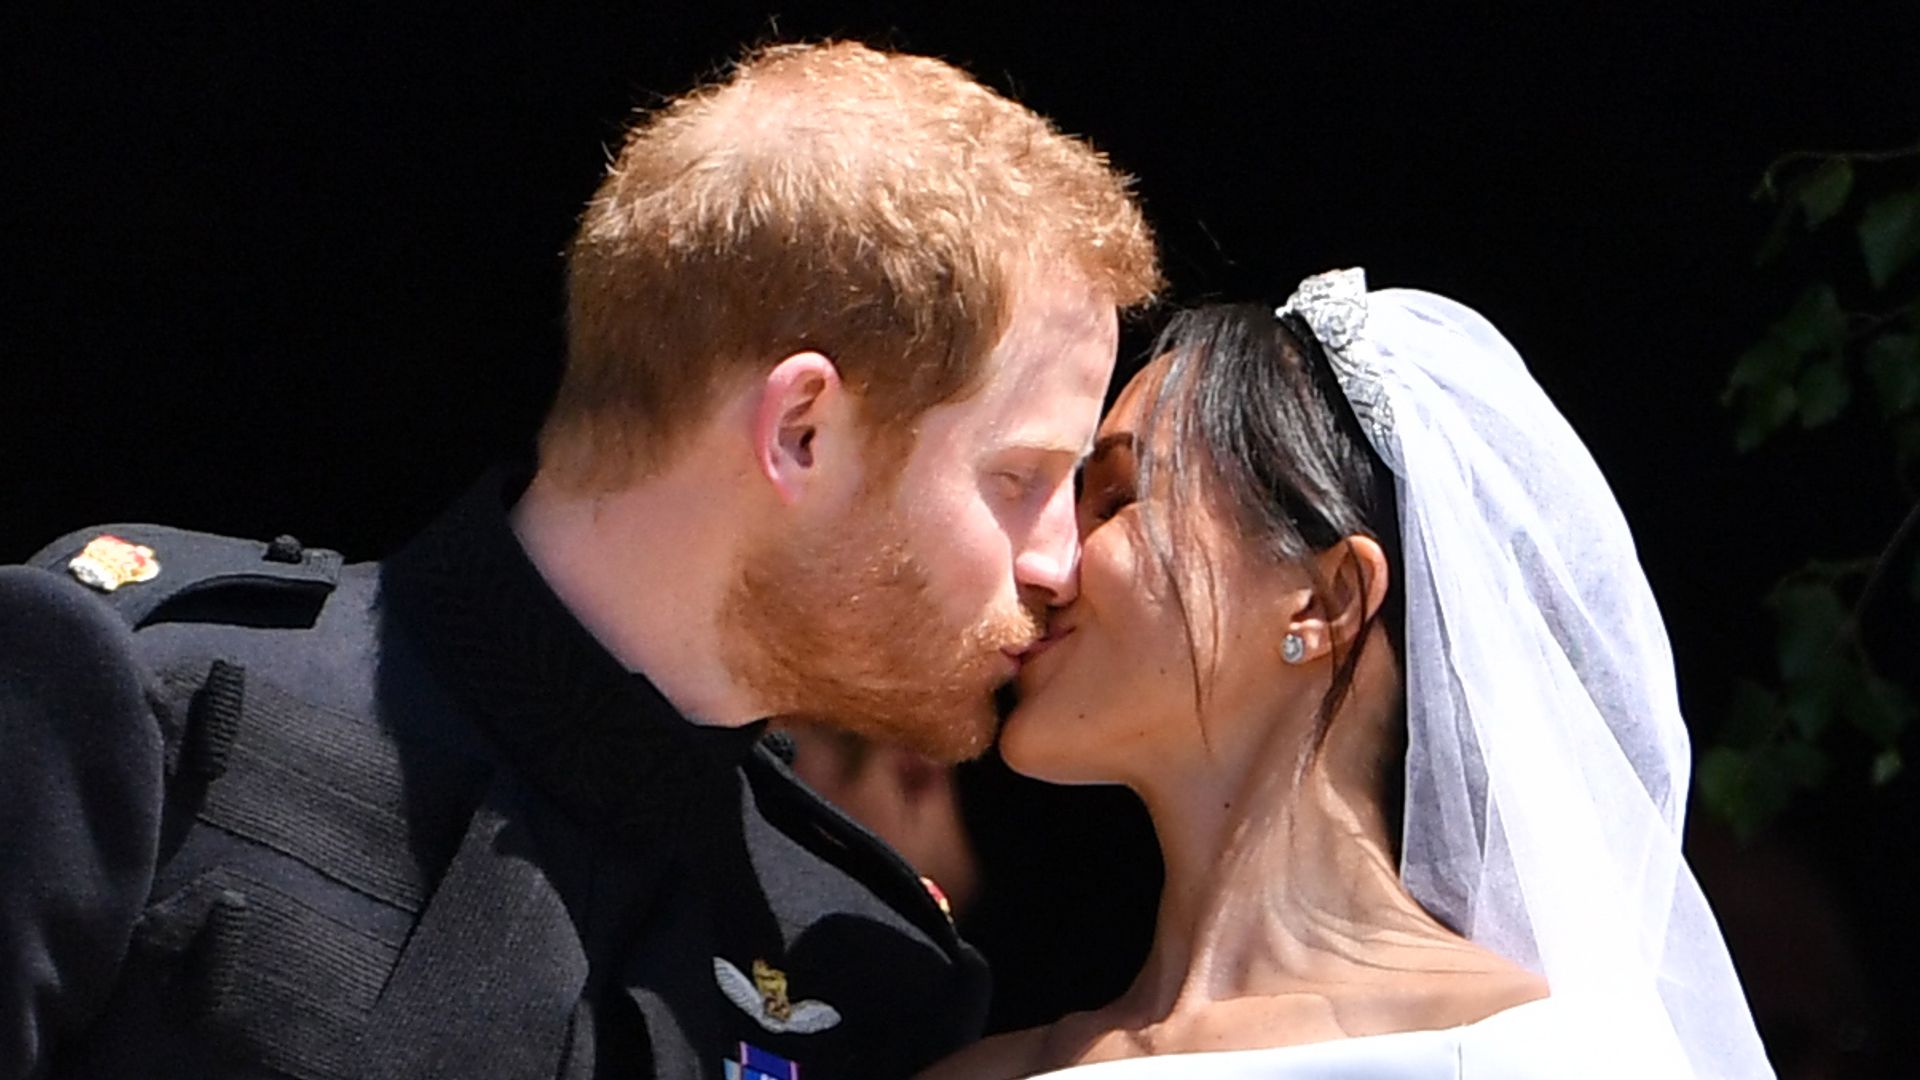 Harry and Meghan kiss on wedding day